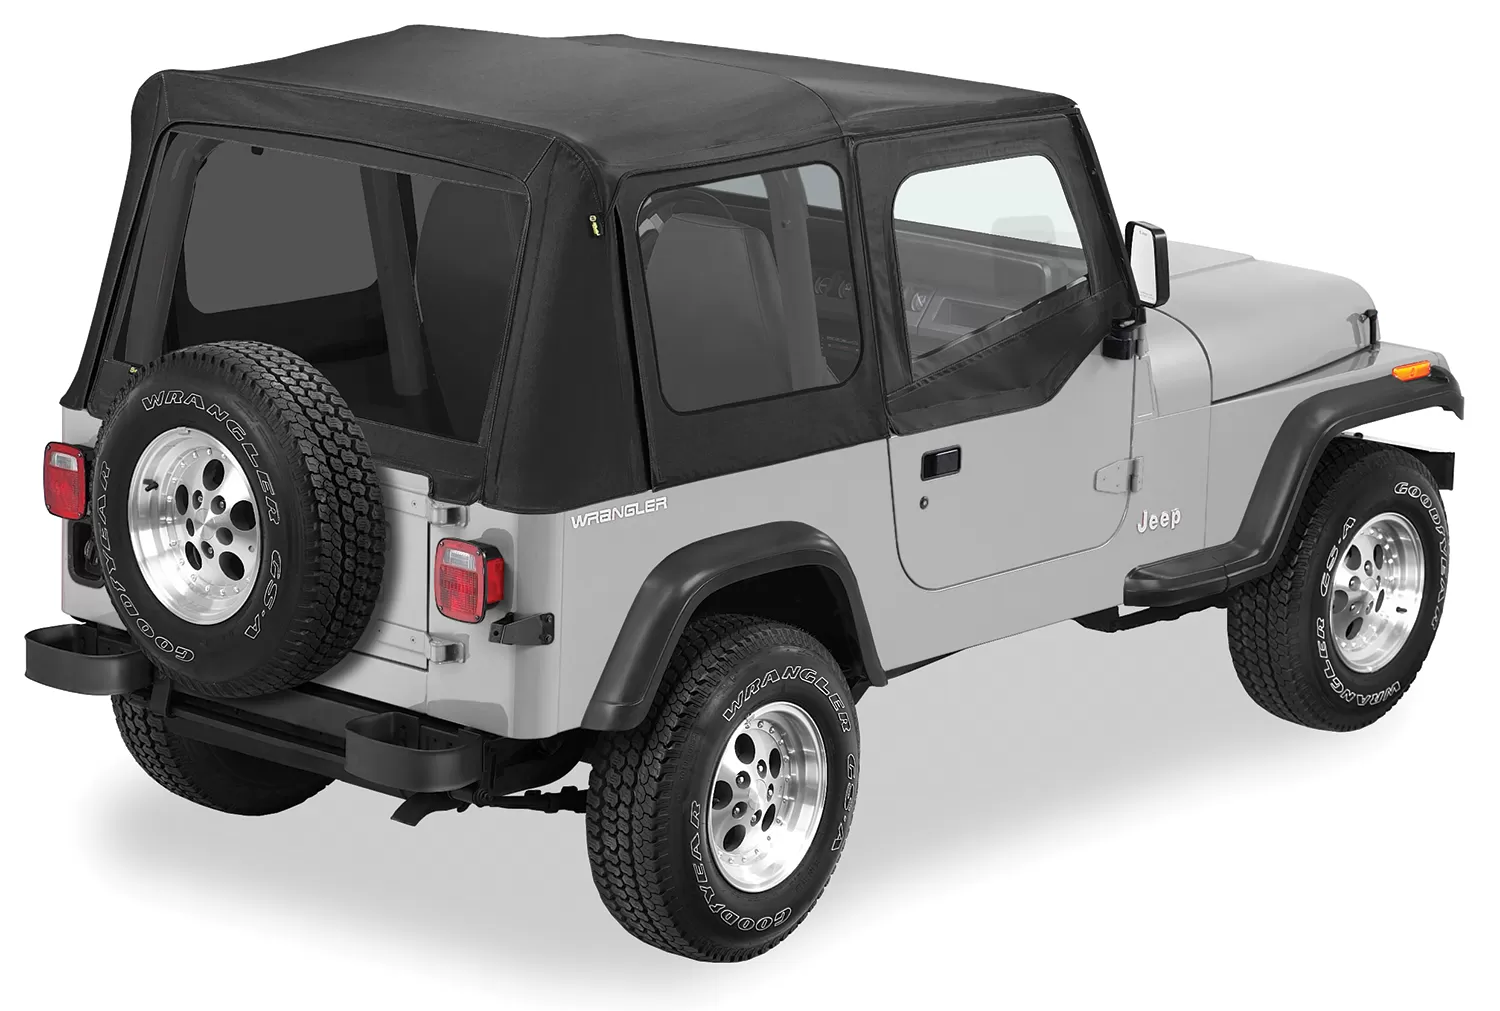 Pavement Ends By Bestop Black Denim Replay OEM Replacement Soft Top Tinted Windows Jeep Wrangler 1988-1995 - 51132-15